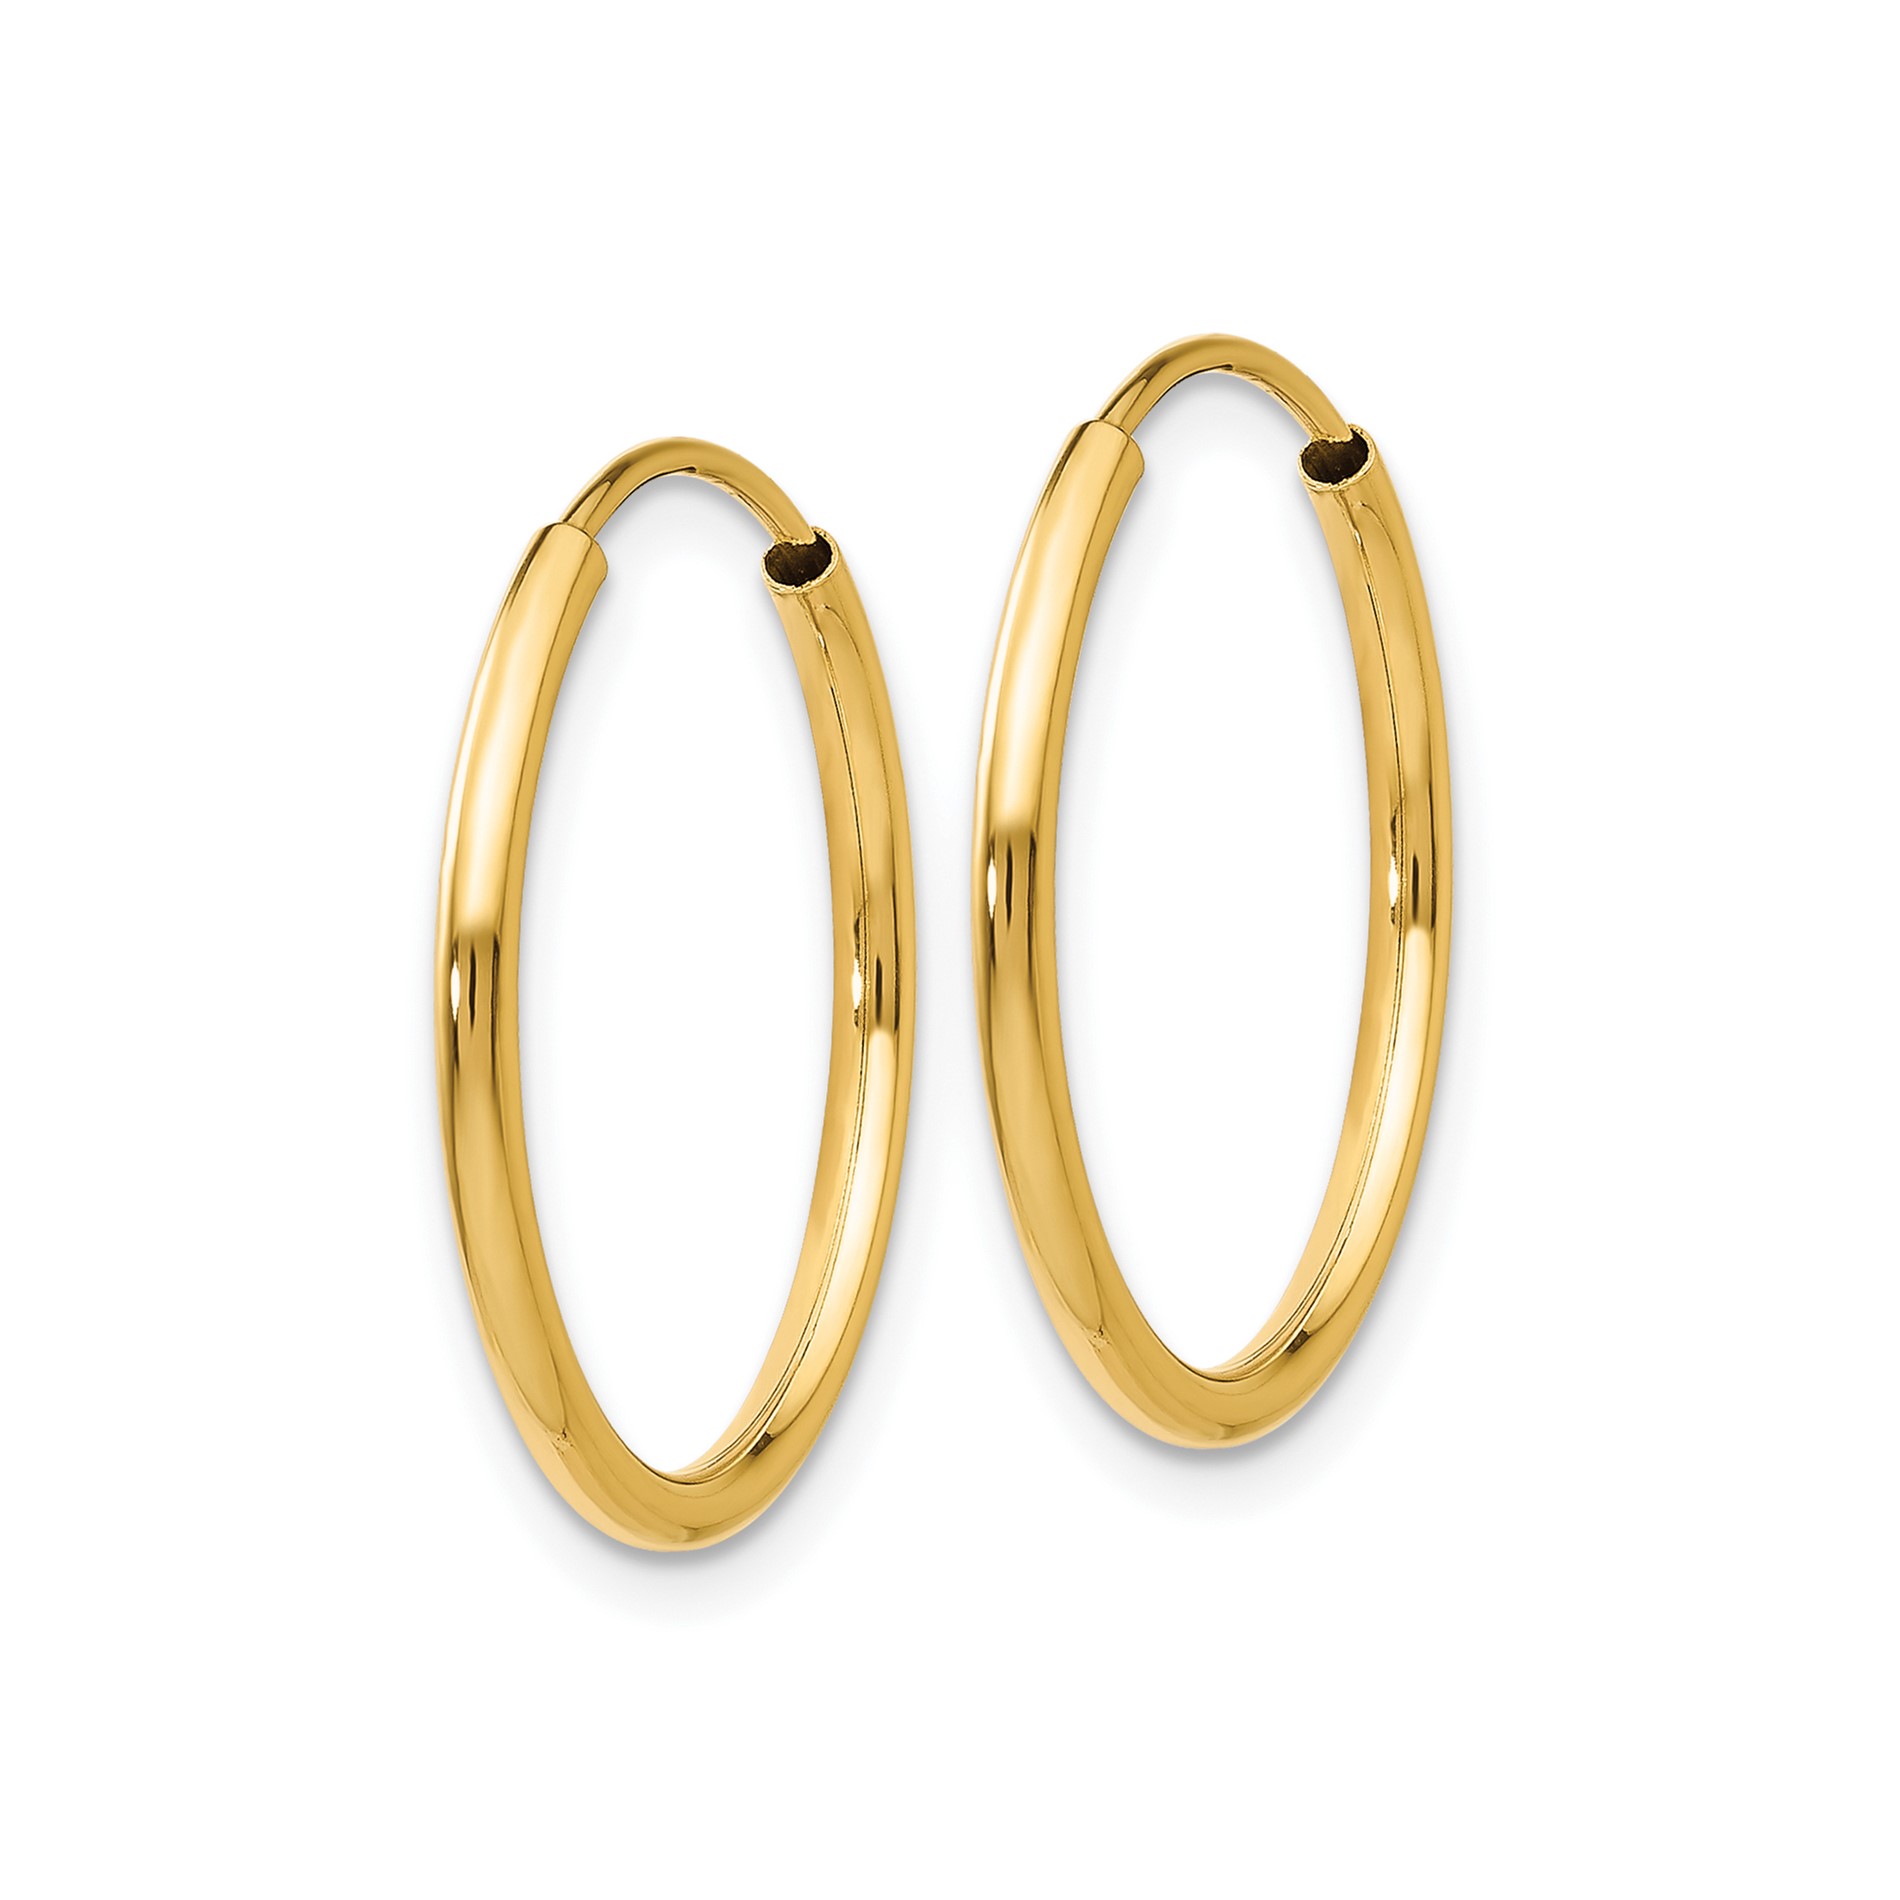 Diamond2Deal 10K Yellow Gold 1.5mm Polished Endless Round Hoop Earrings